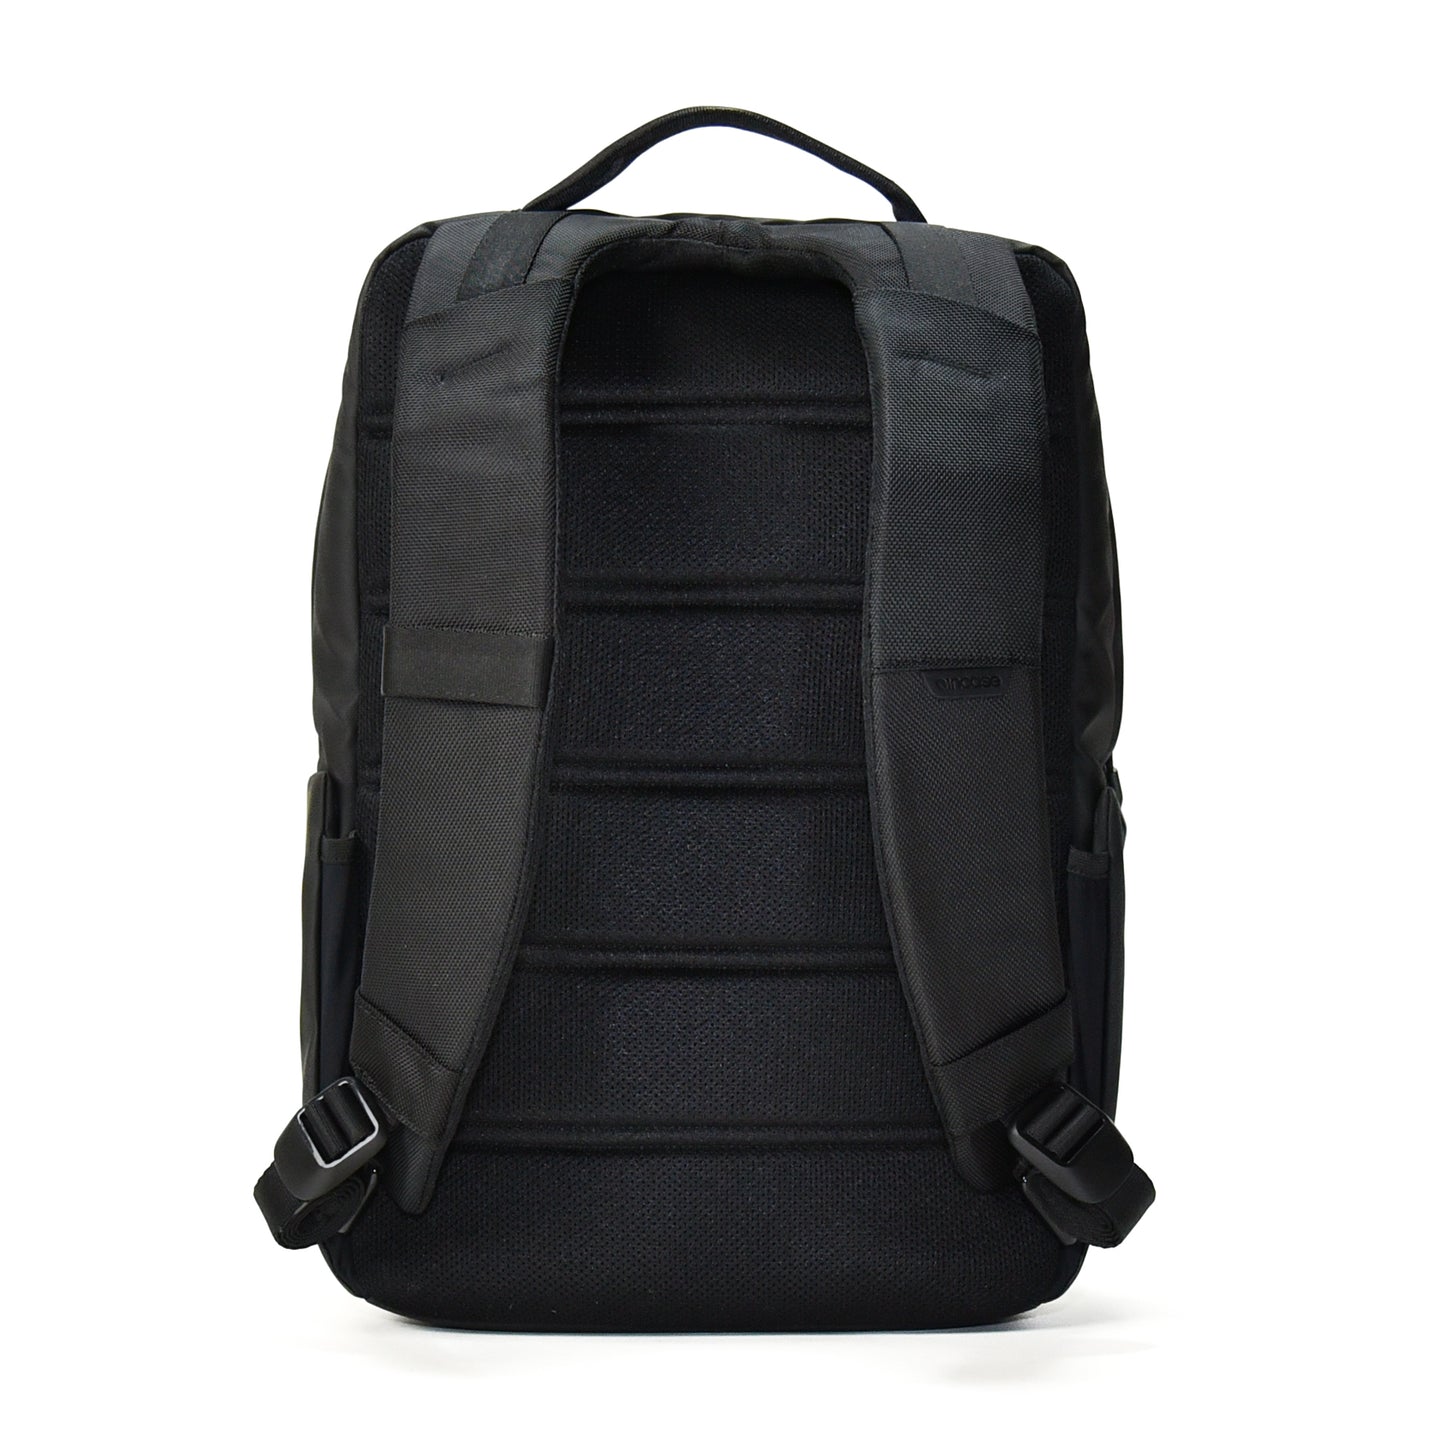 City Compact Backpack With 1,680D -Black-